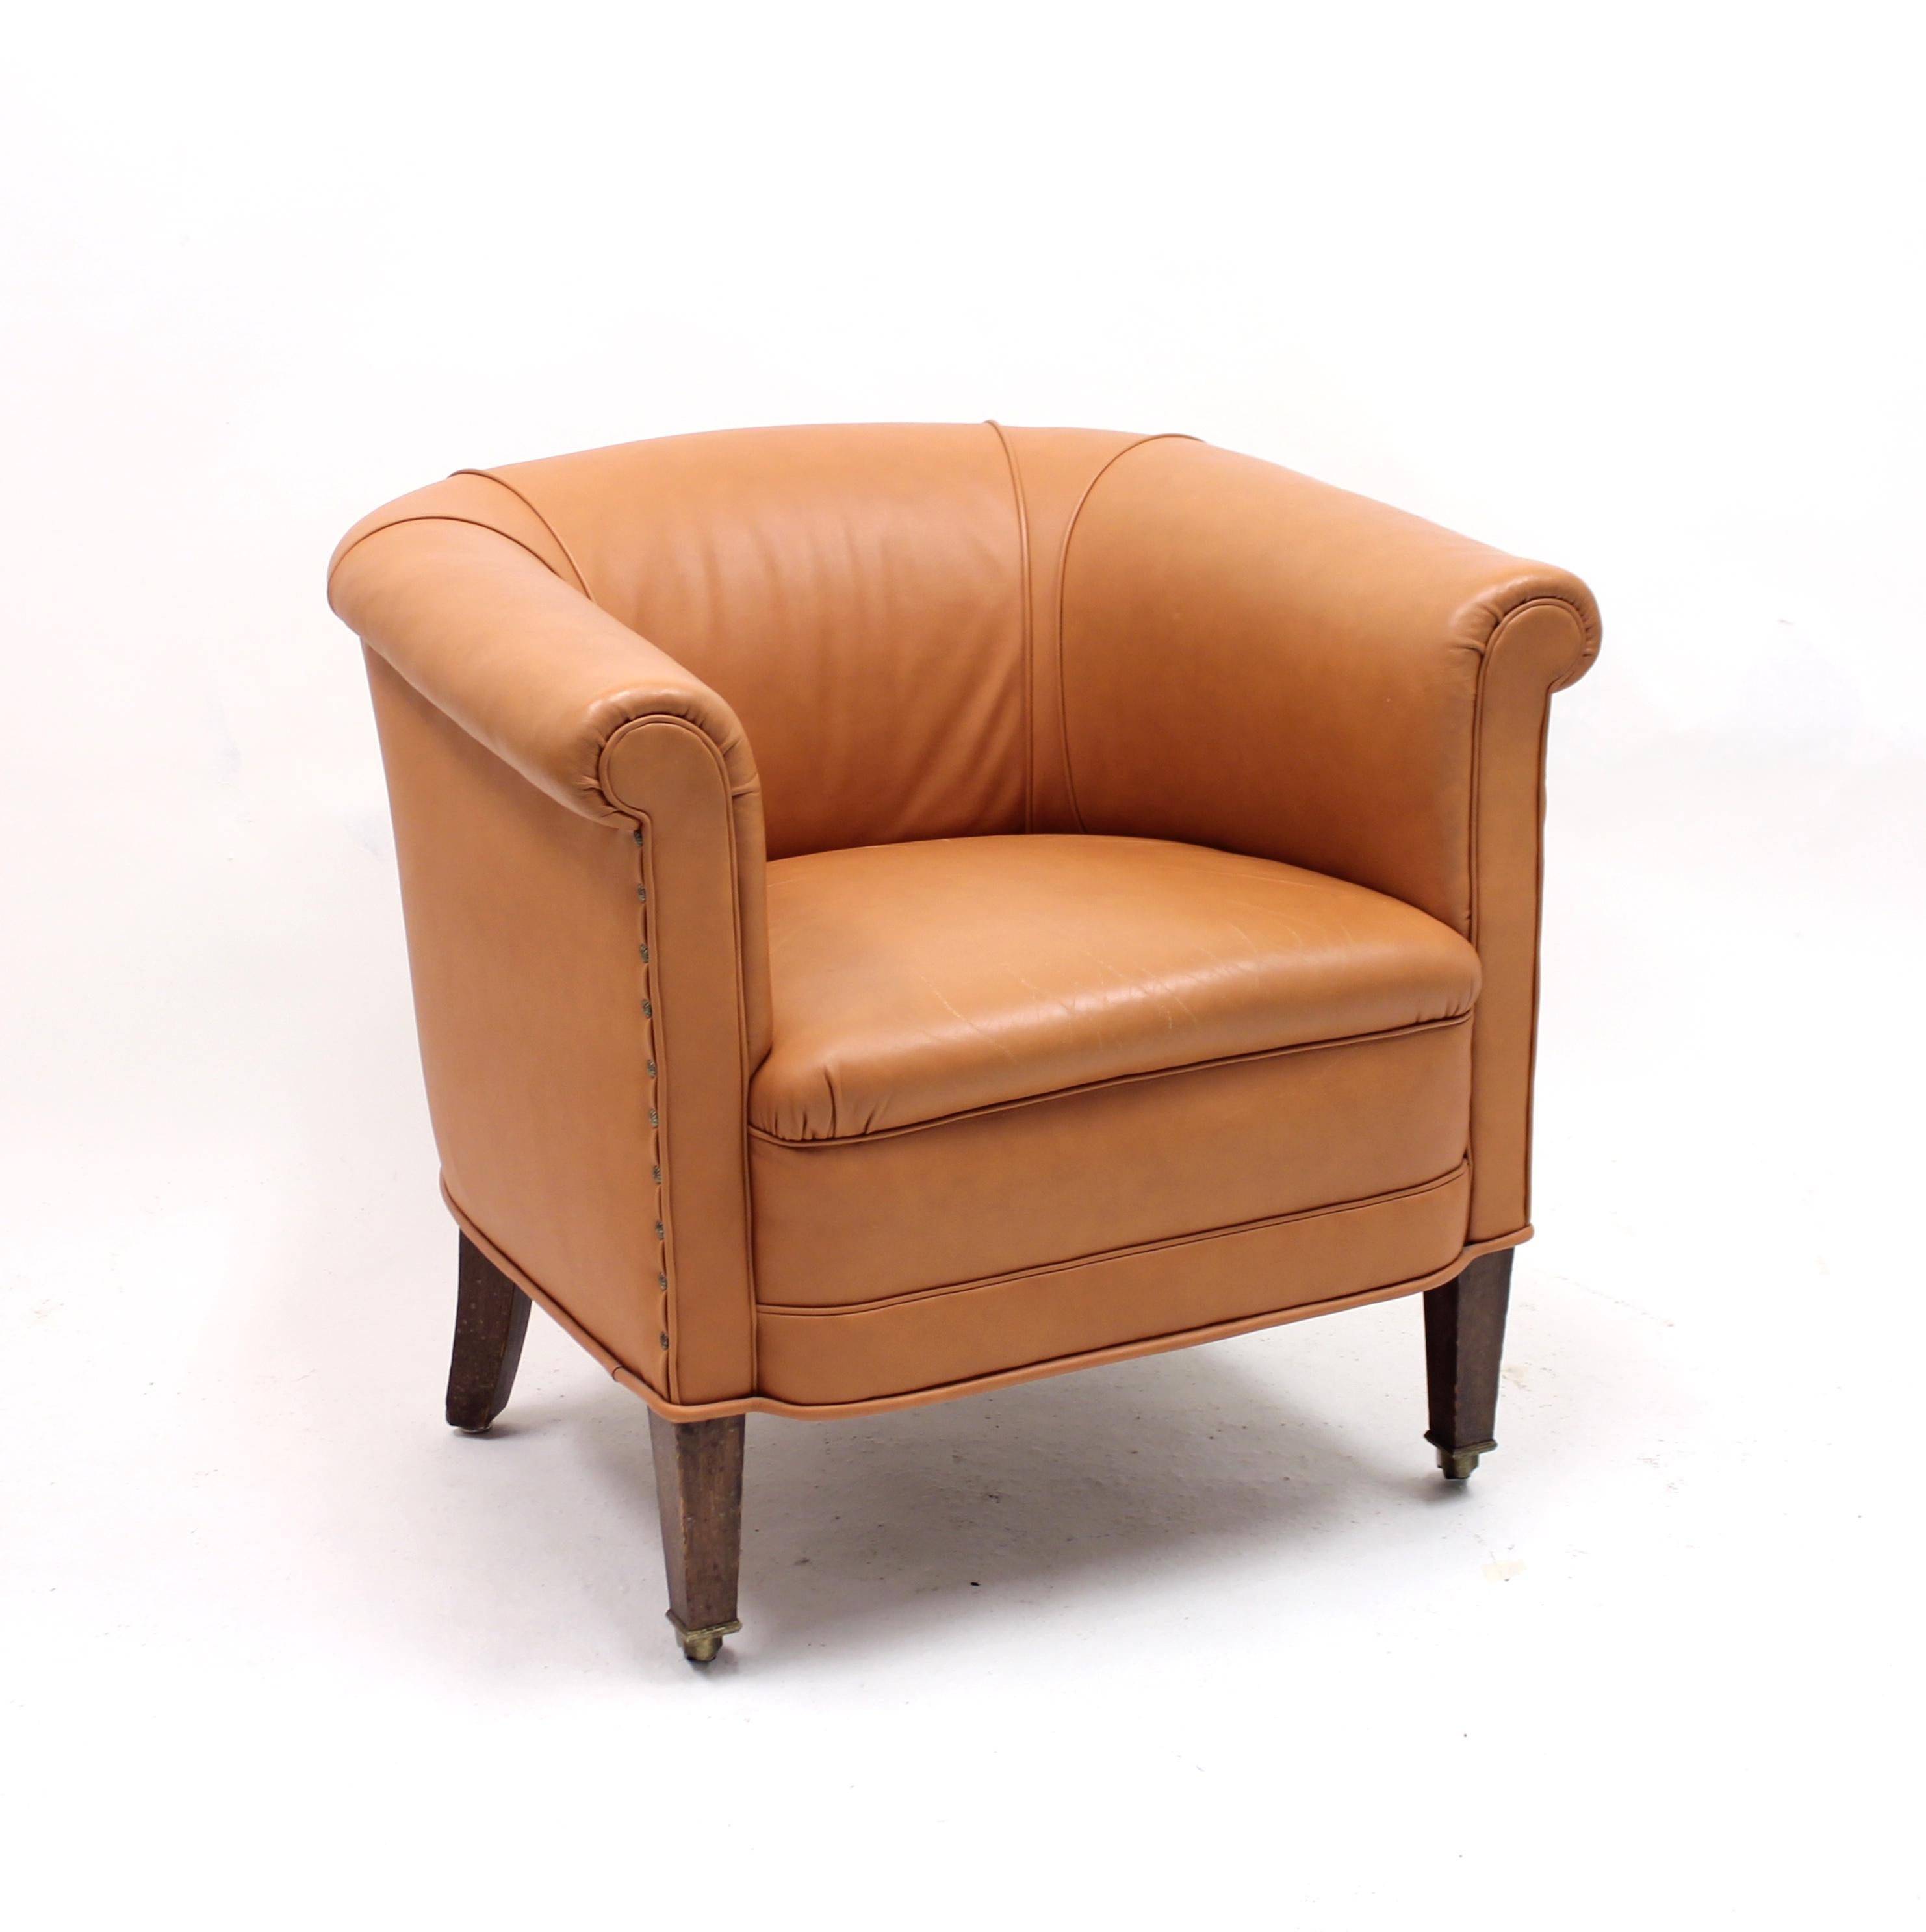 Mid-20th Century Brown Leather Club Chair on Castors, 1930s